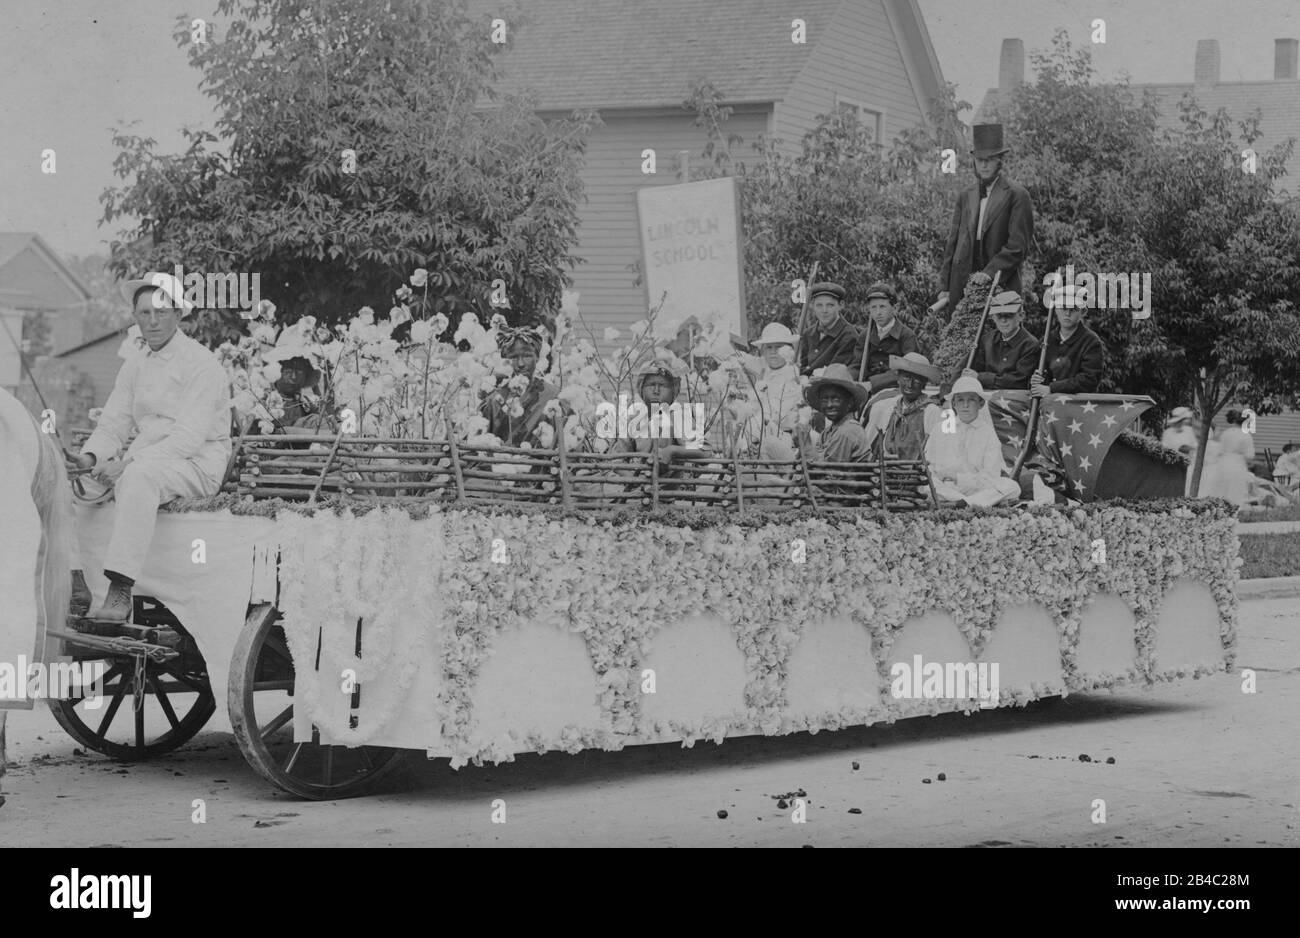 Racist  Parade float of Blackface and White children sitting in a thick Cotton field on a flatbed farm wagon, c. 1915. All around the field and kids is an imitation split rail fence. Other boys, dressed as soldiers armed with Civil War-era musket rifles watch over them. A man dressed as top-hatted President Abe Lincoln stands in back, holding a scrolled paper. Behind the kids and cotton is a tall white banner, weakly printed with 'Lincoln School'  All these folks and the location are unknown.  To see my related vintage images, Search:  Prestor  vintage  African Stock Photo